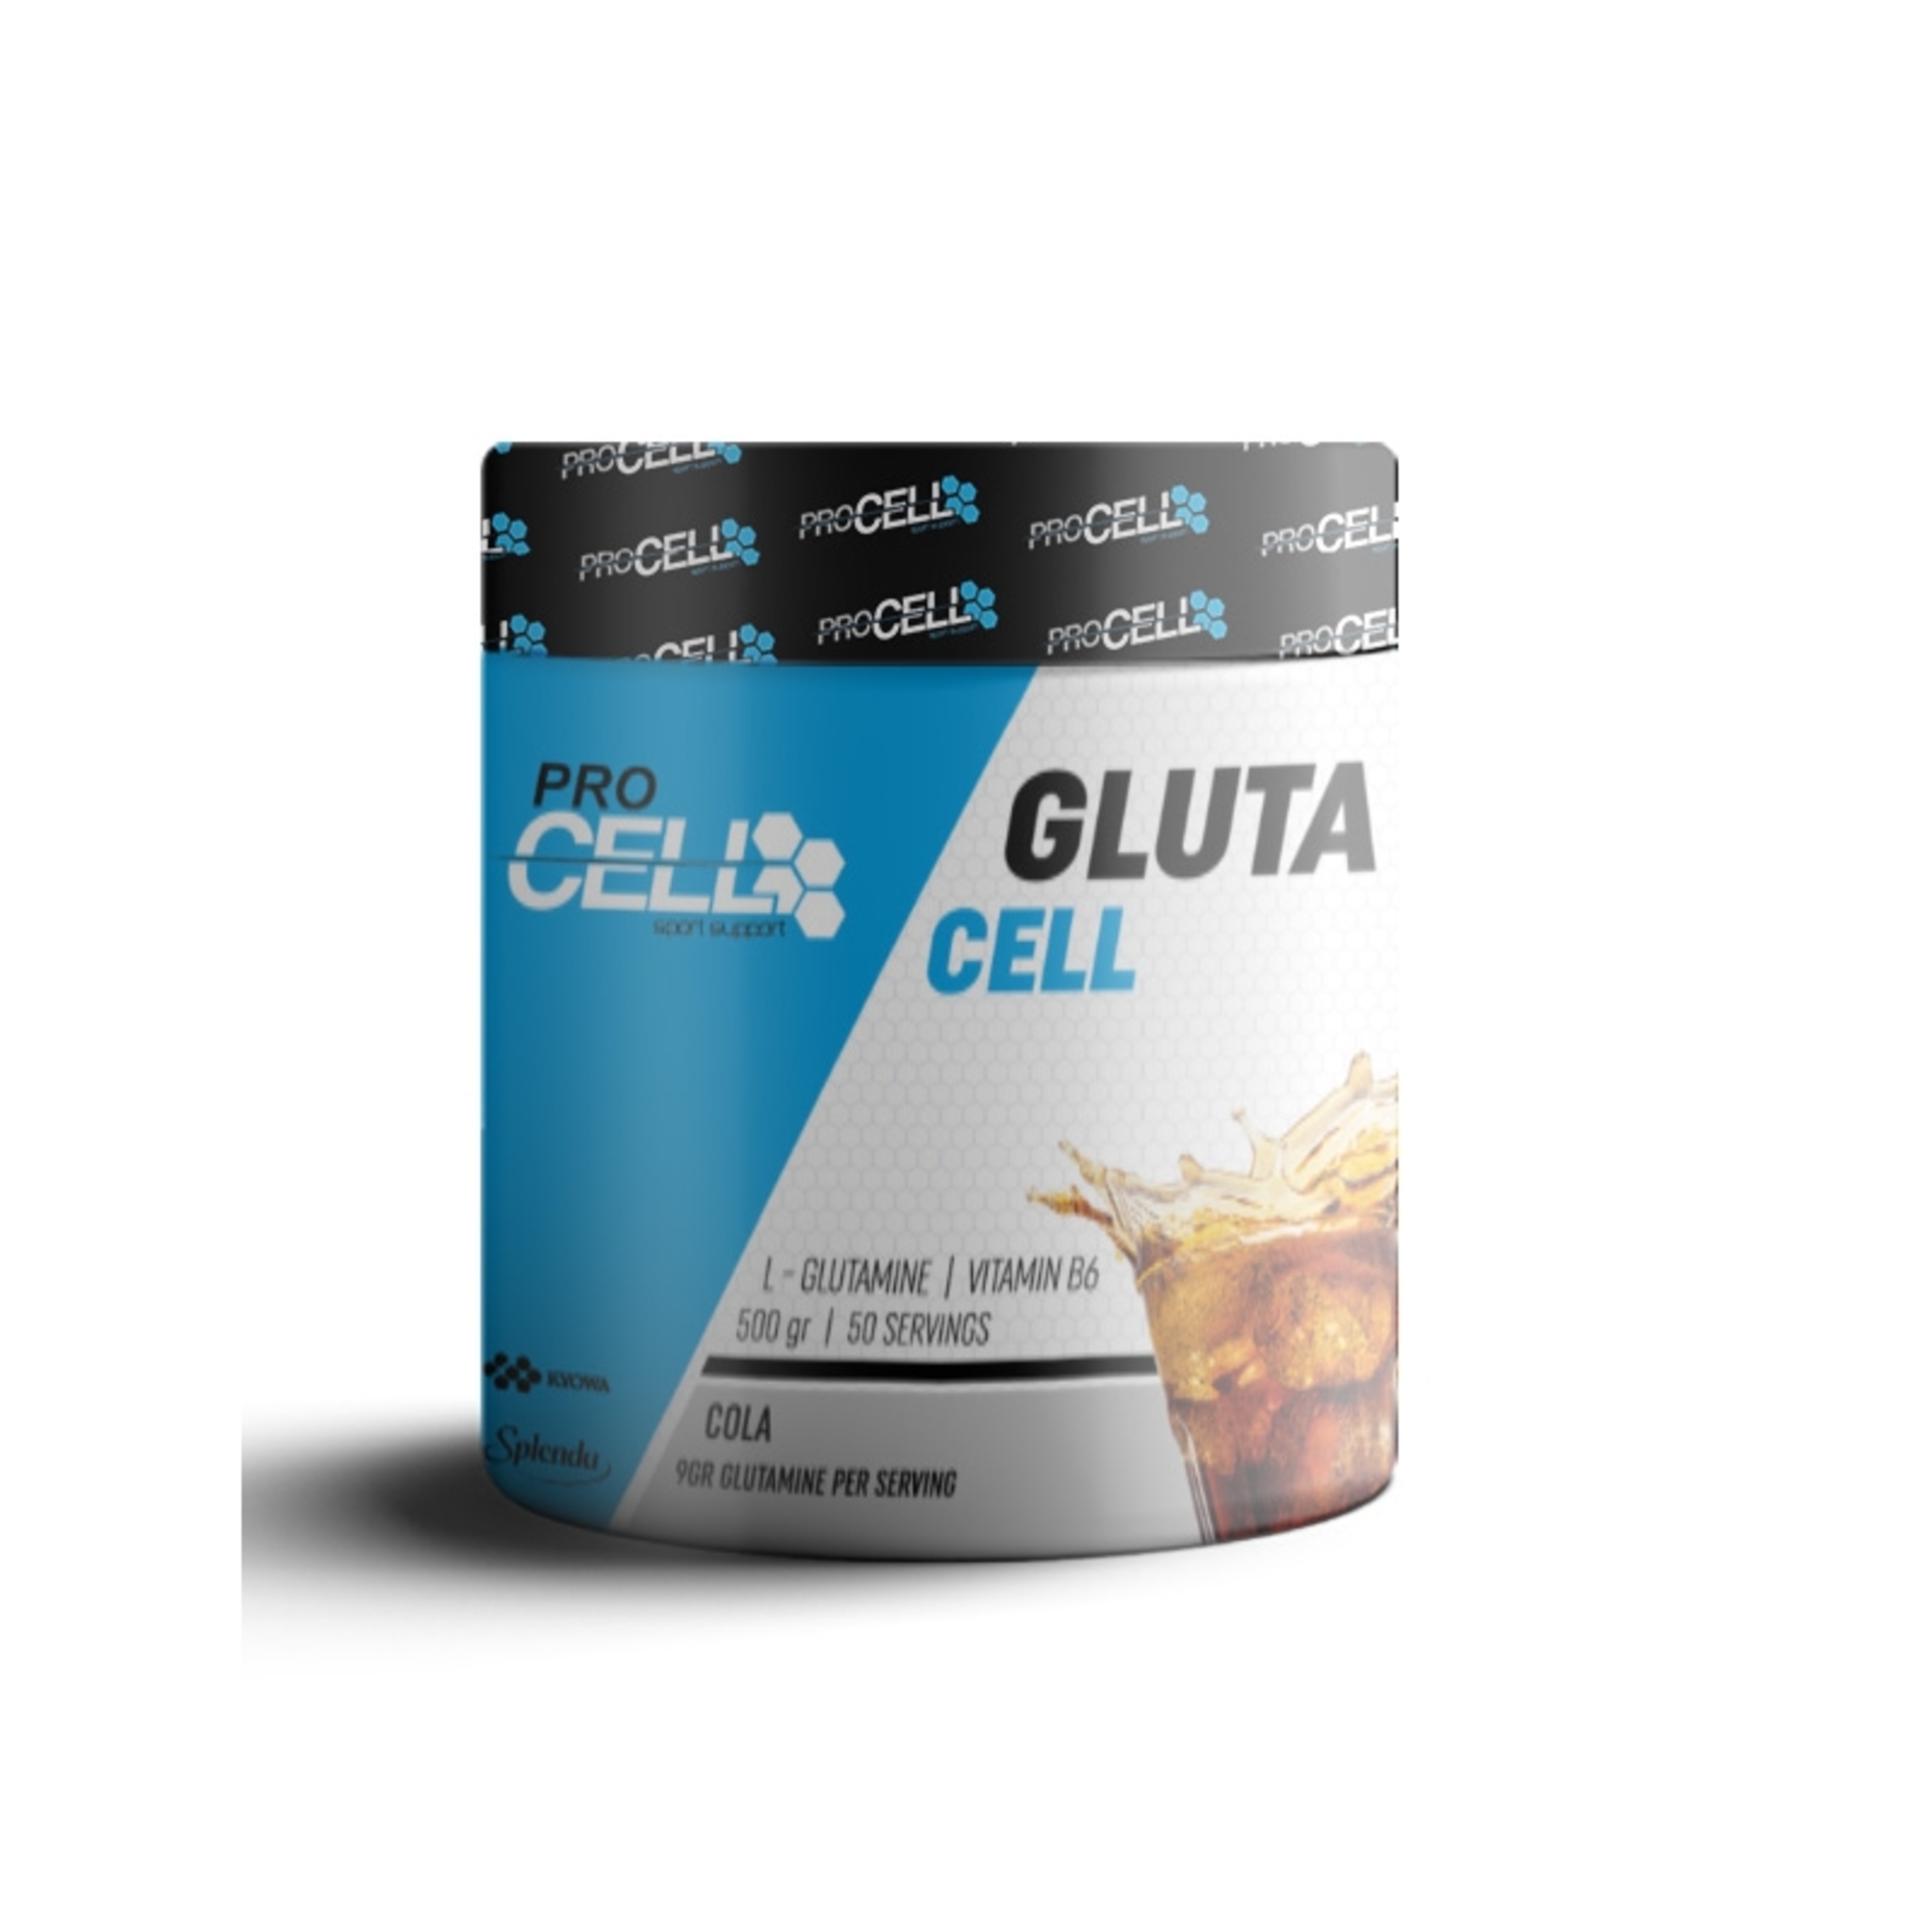 Glutacell 500gr Procell